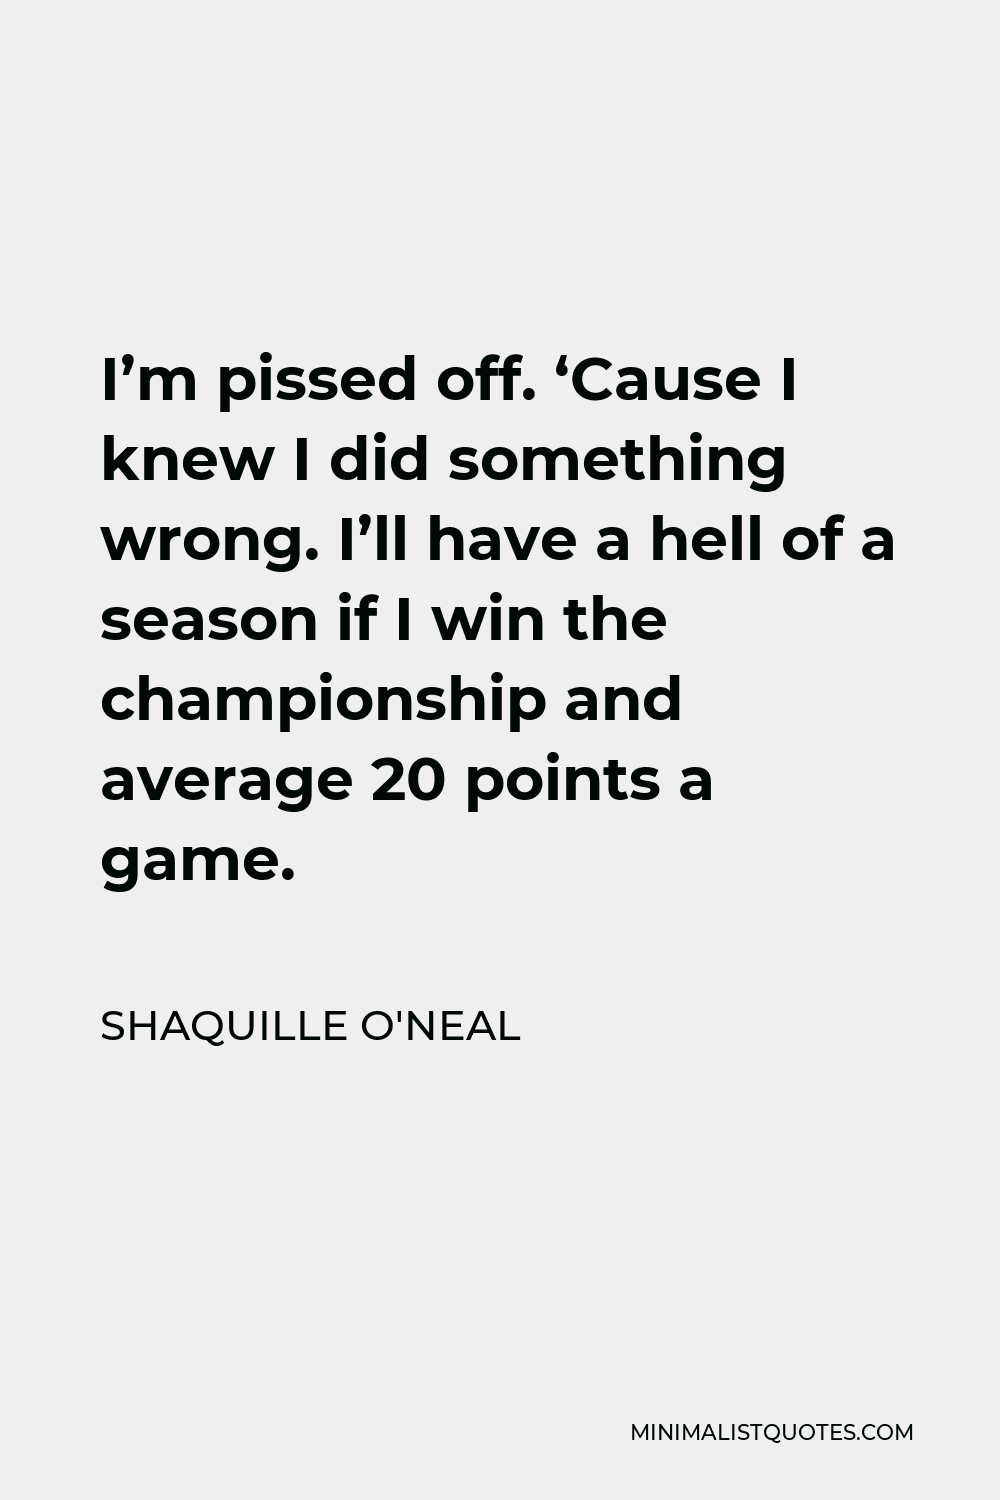 Shaquille O'Neal Quote - I’m pissed off. ‘Cause I knew I did something wrong. I’ll have a hell of a season if I win the championship and average 20 points a game.